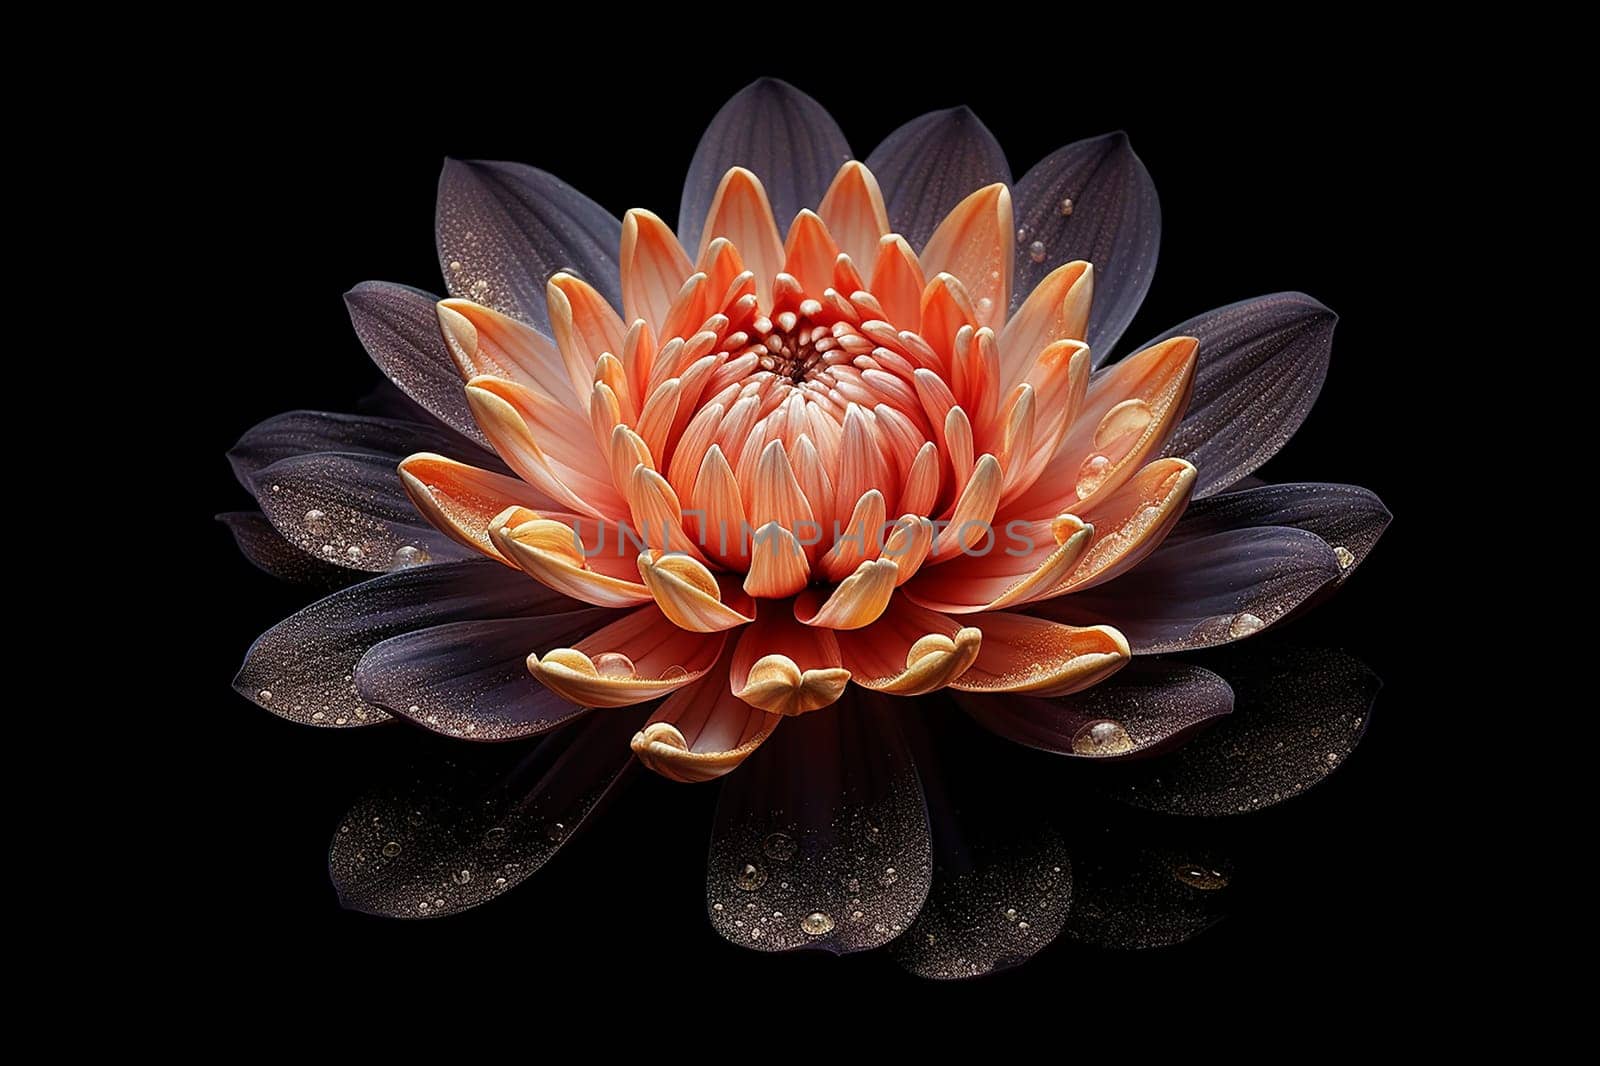 A vibrant orange flower with water droplets against a black background. by Hype2art